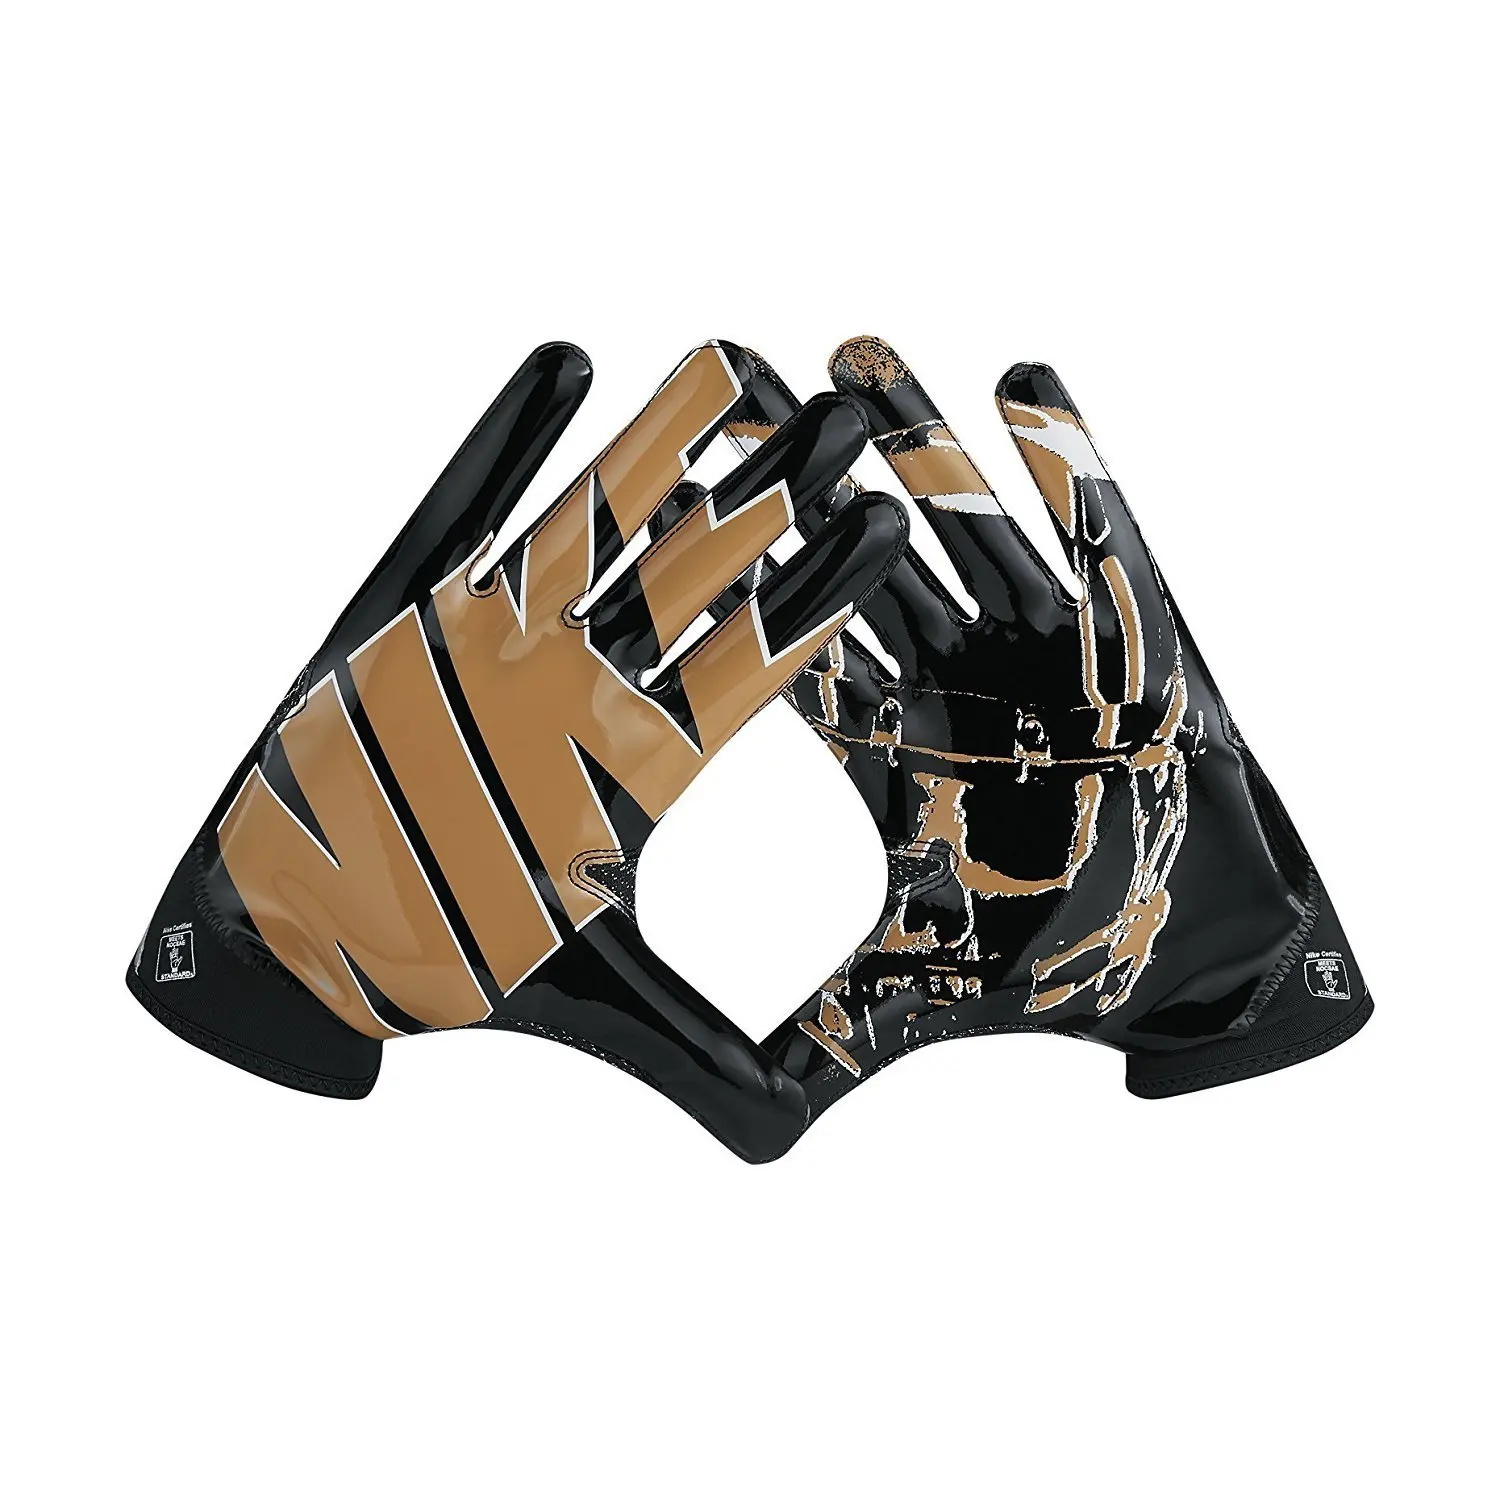 nike salute to service football gloves